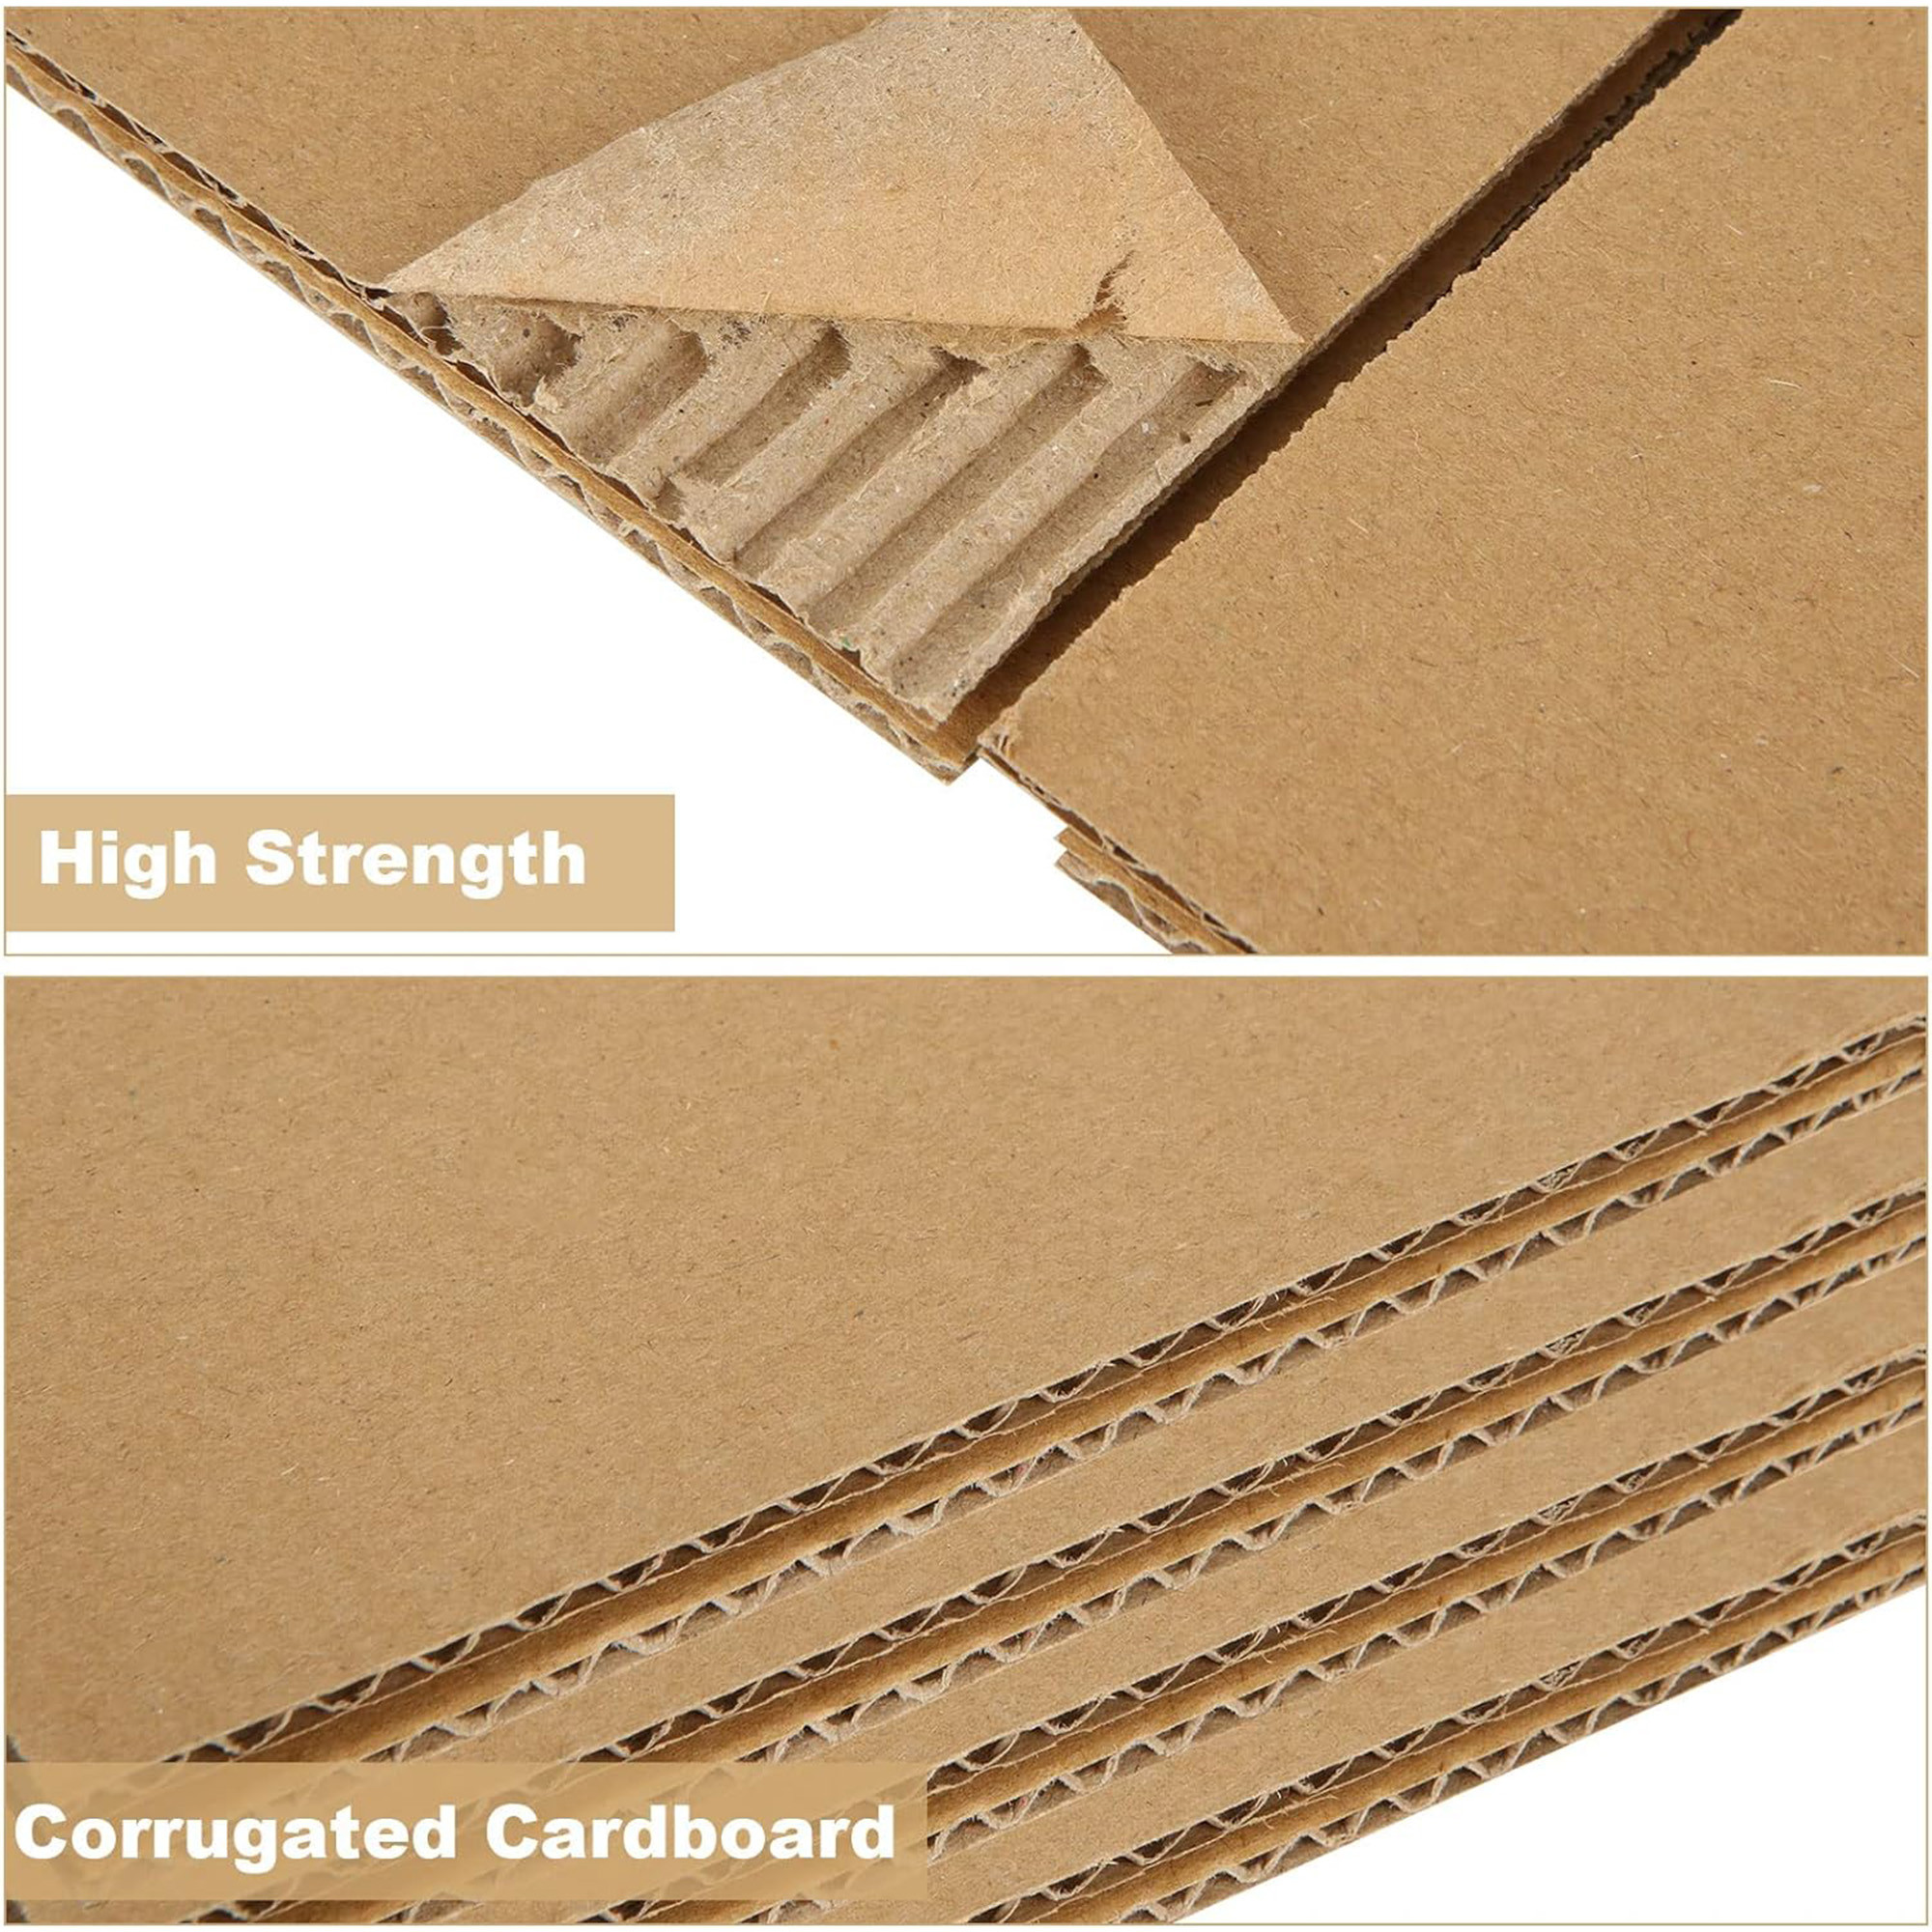 Kuber Industries Corrugated Box | 5 Ply Corrugated Packing Box | Corrugated for Shipping | Corrugated for Courier & Goods Transportation | L 30 x W 23.7 x H 21.5 Inch | Brown